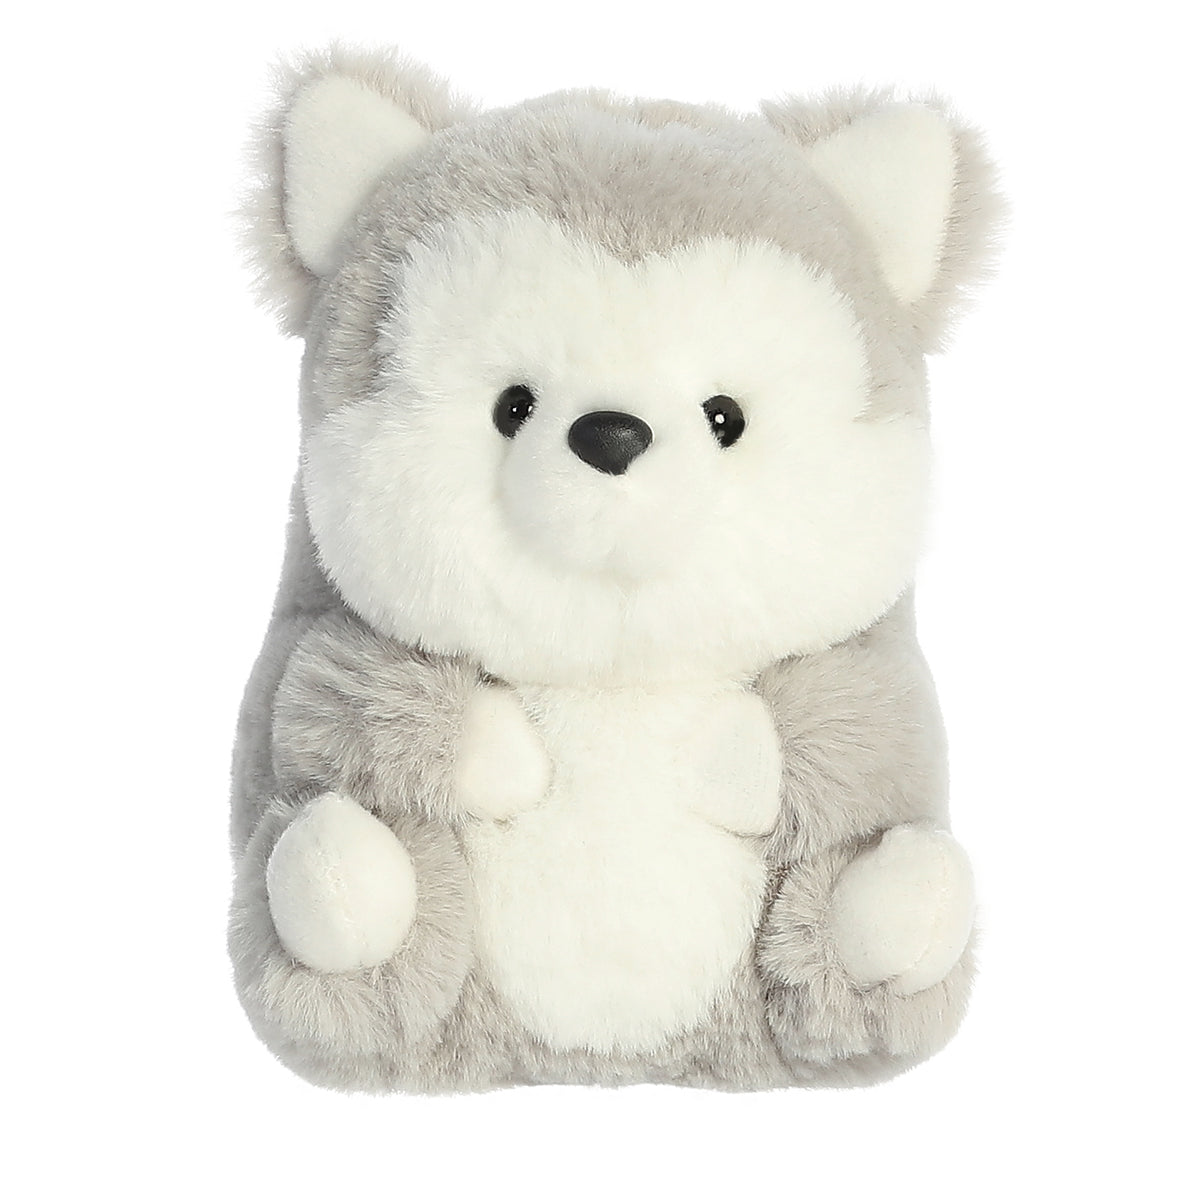 Husky plush with a soft light gray coat and white underbelly comfortably sitting on its rear with arms crossed and legs up.